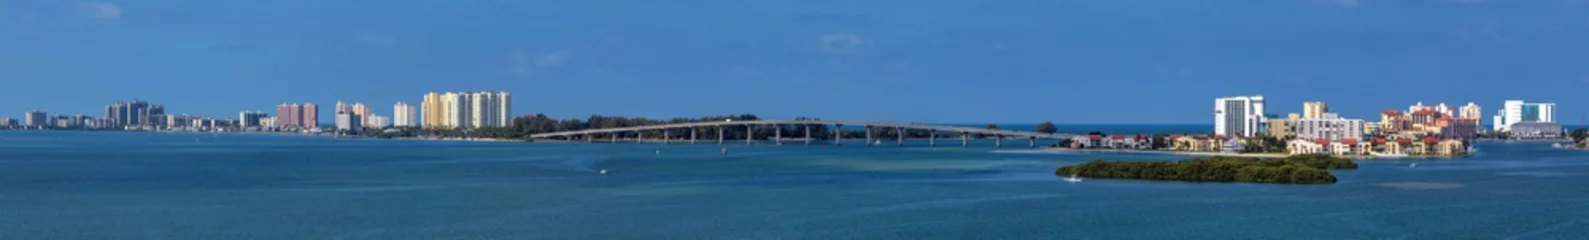 Photo sur Aluminium Clearwater Beach, Floride Sand Key Bridge - A panoramic view of Sand Key Bridge, connecting Clearwater at right and Belleair Beach at left, over the Clearwater Pass on a calm Autumn morning, Florida, USA.